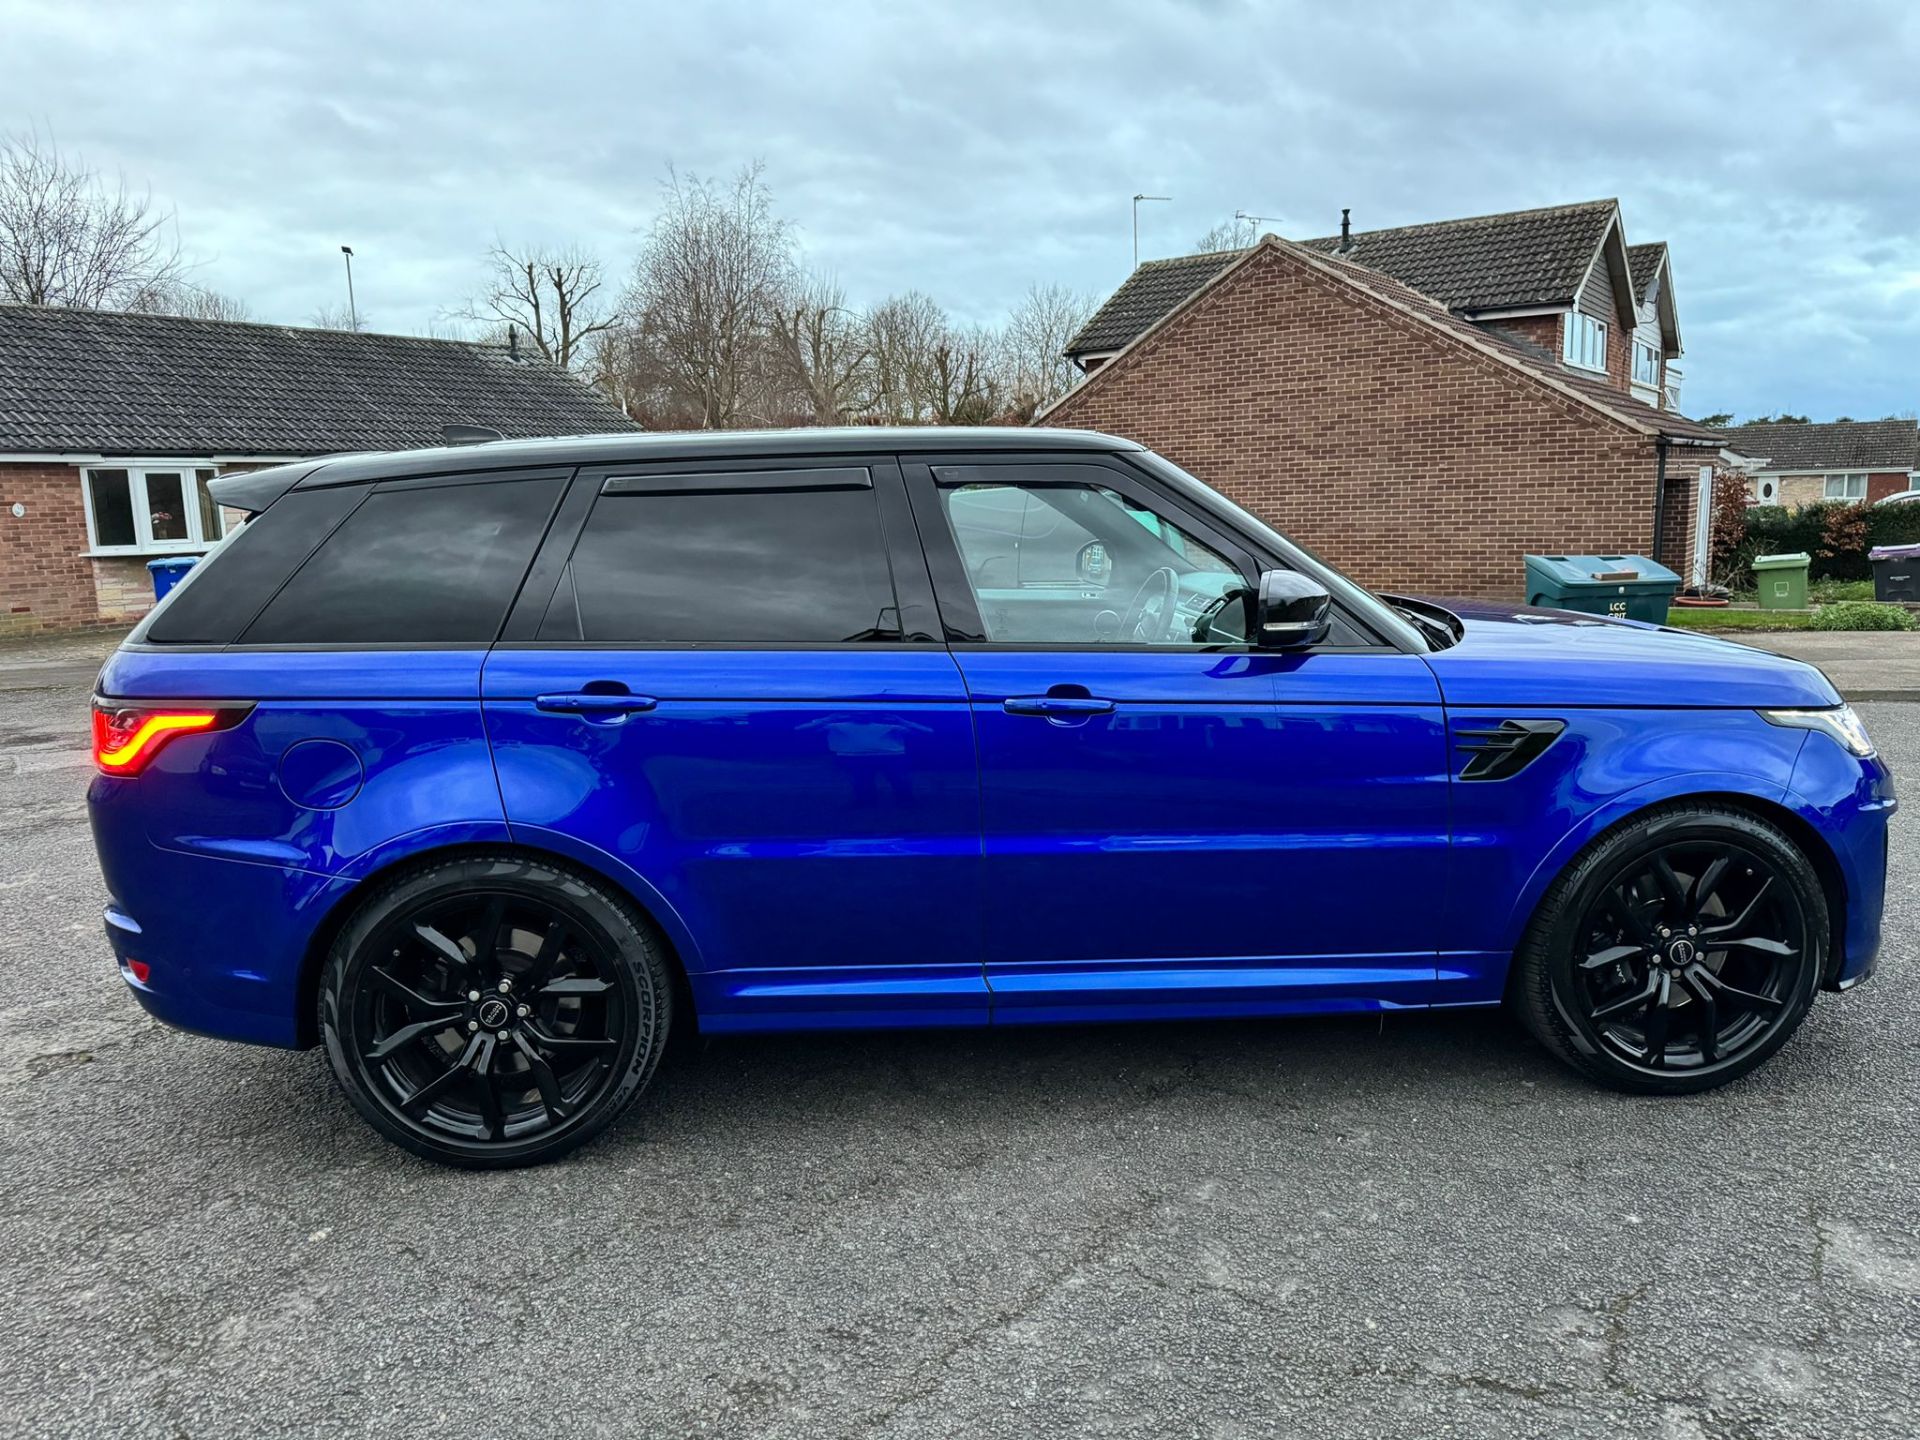 2018 18 RANGE ROVER SVR - 62K MILES WITH FULL LAND ROVER HISTORY - EXTREMELY CLEAN EXAMPLE. - Bild 9 aus 10